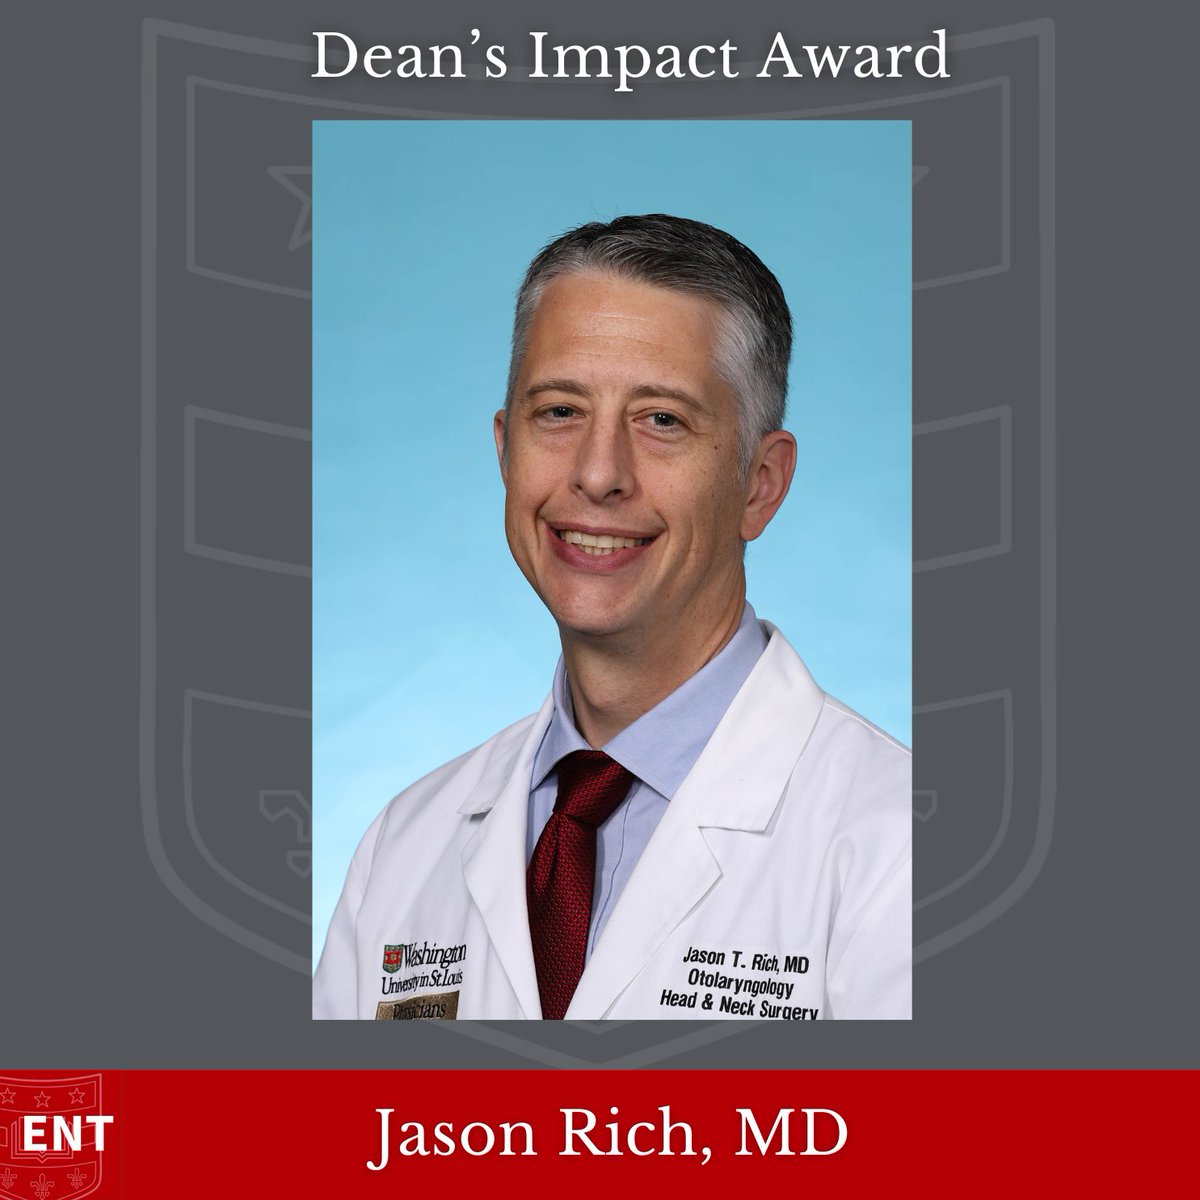 Congratulations to Jason Rich, MD, on being the 2024 Dean’s Impact Award recipient! Well deserved!